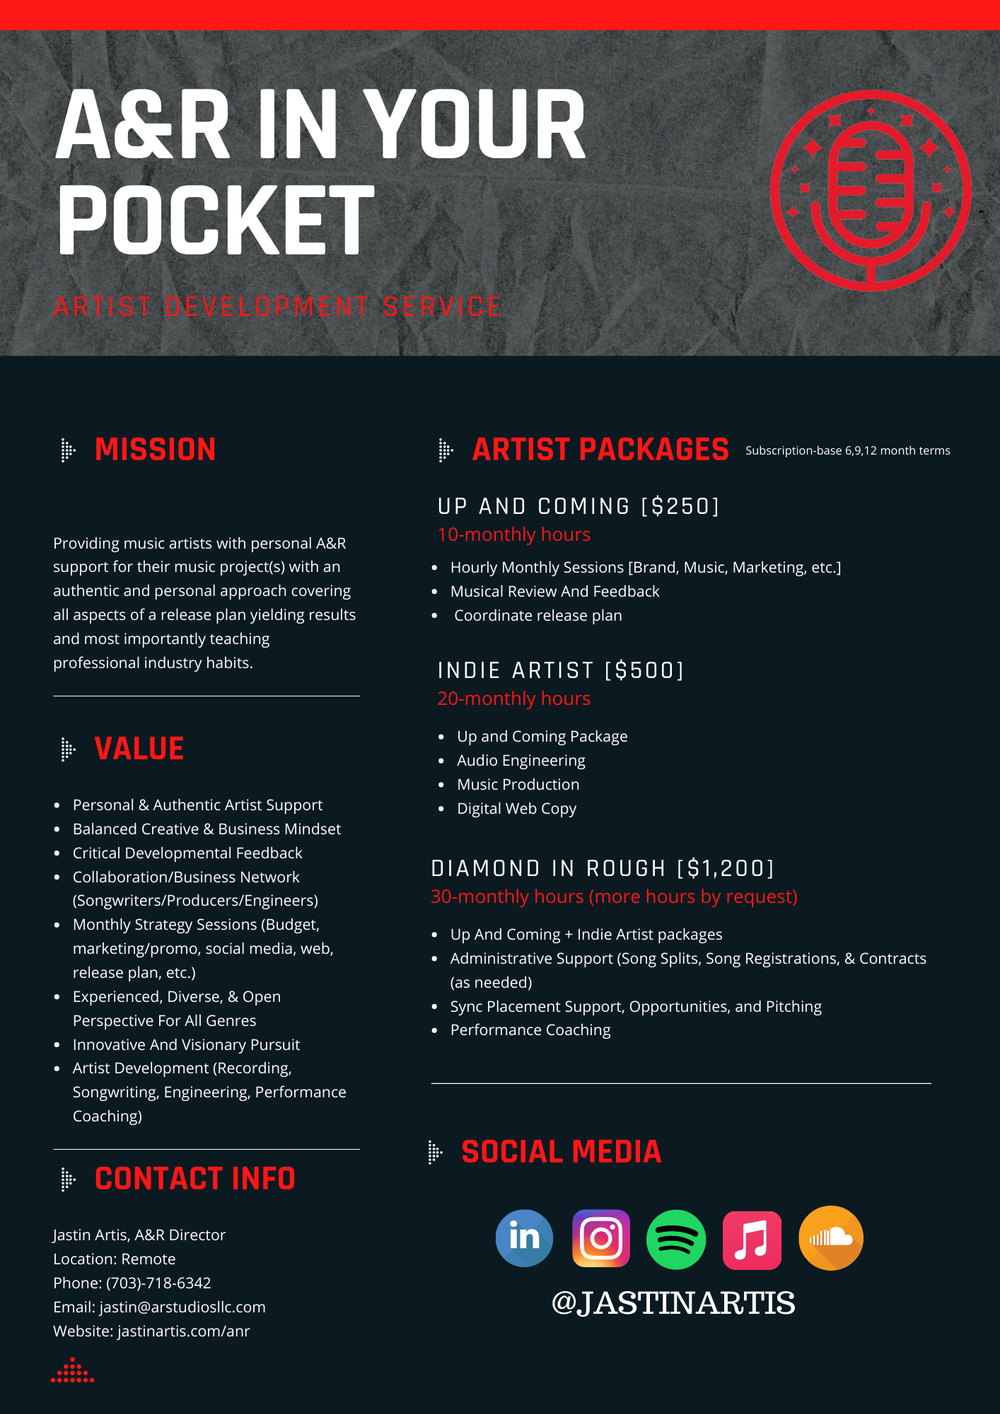 A&R IN YOUR POCKET ONE-SHEET